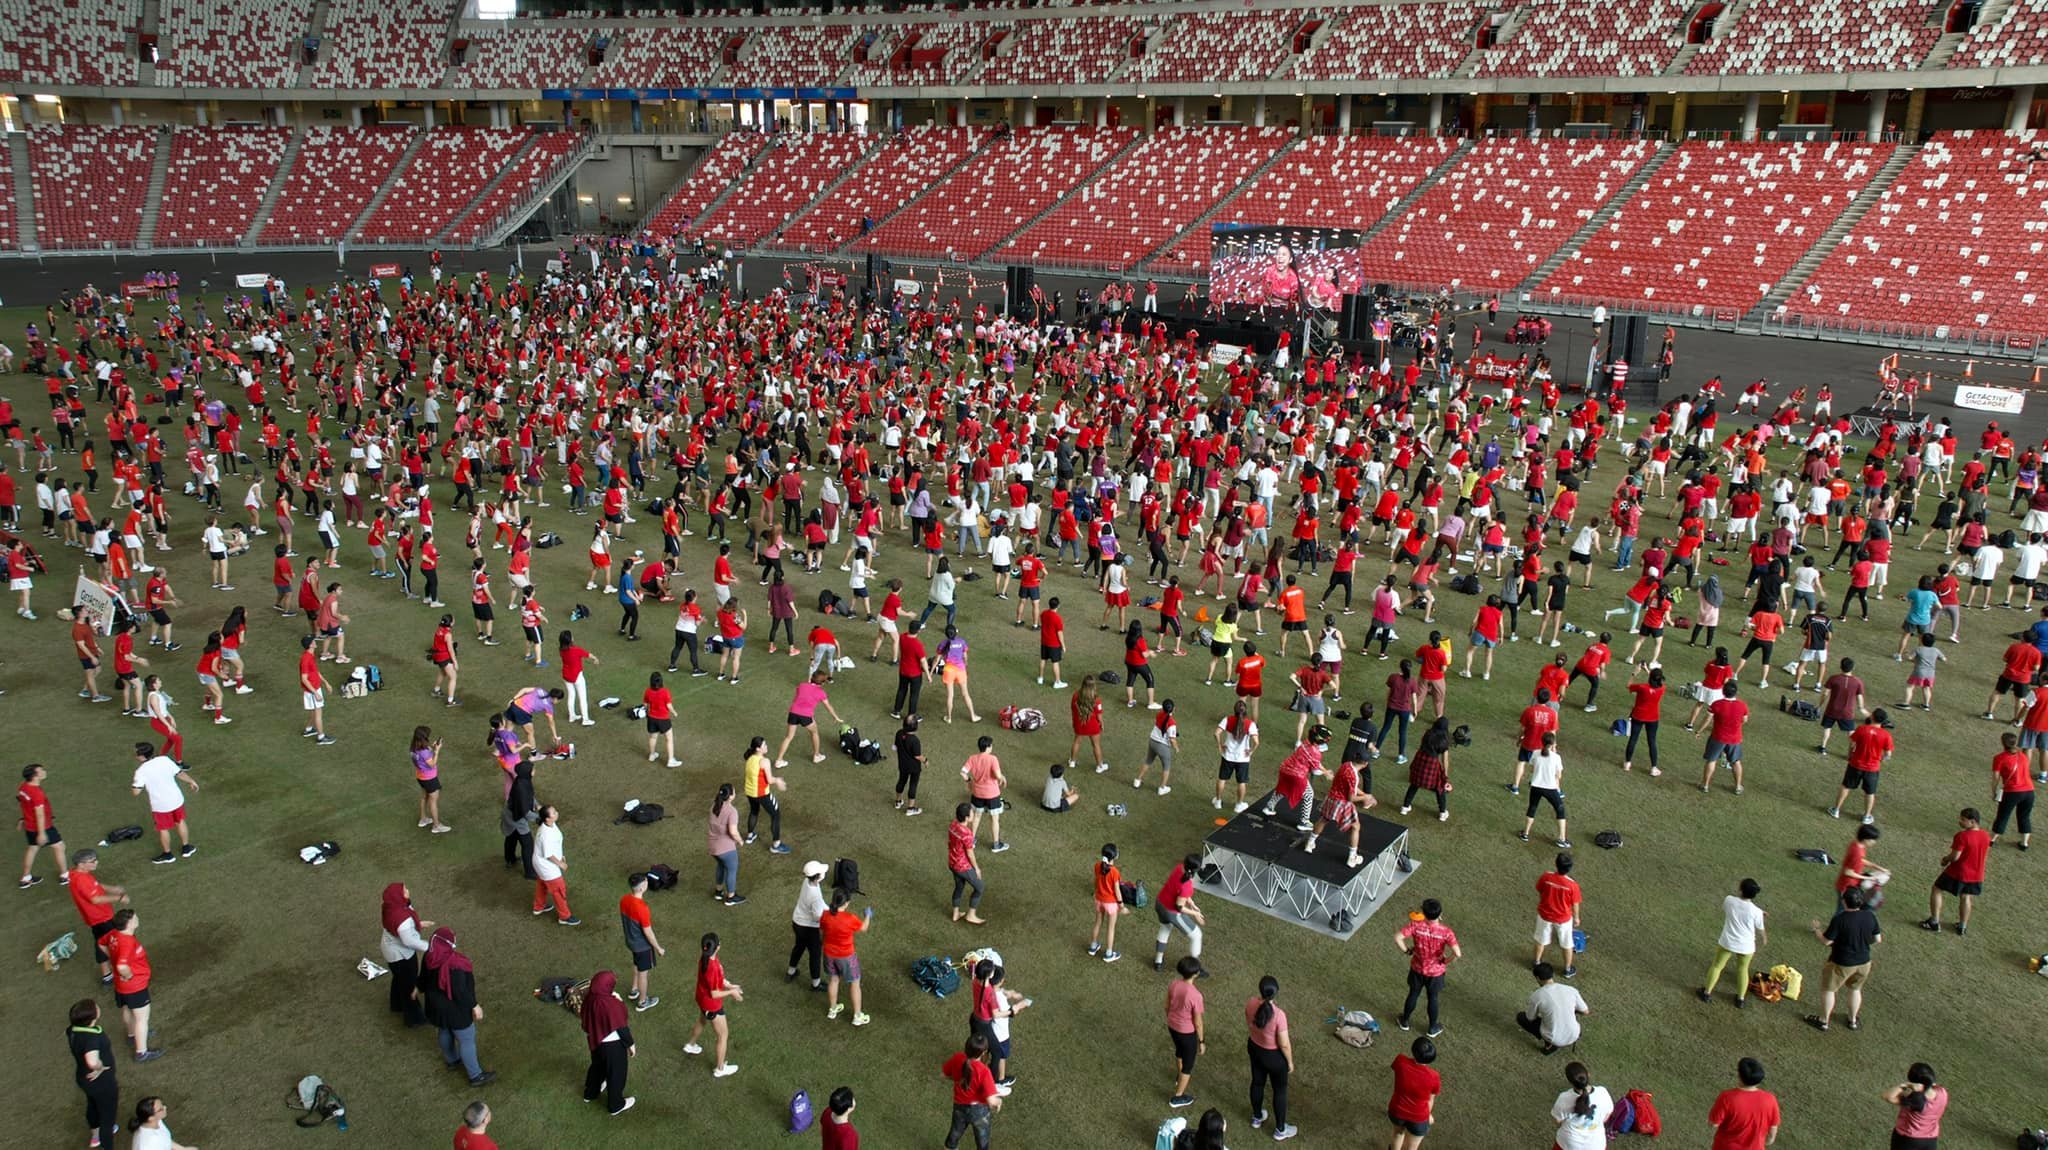 Over 1,600 participants danced their way to set 3 new records in the Singapore Book of Records!